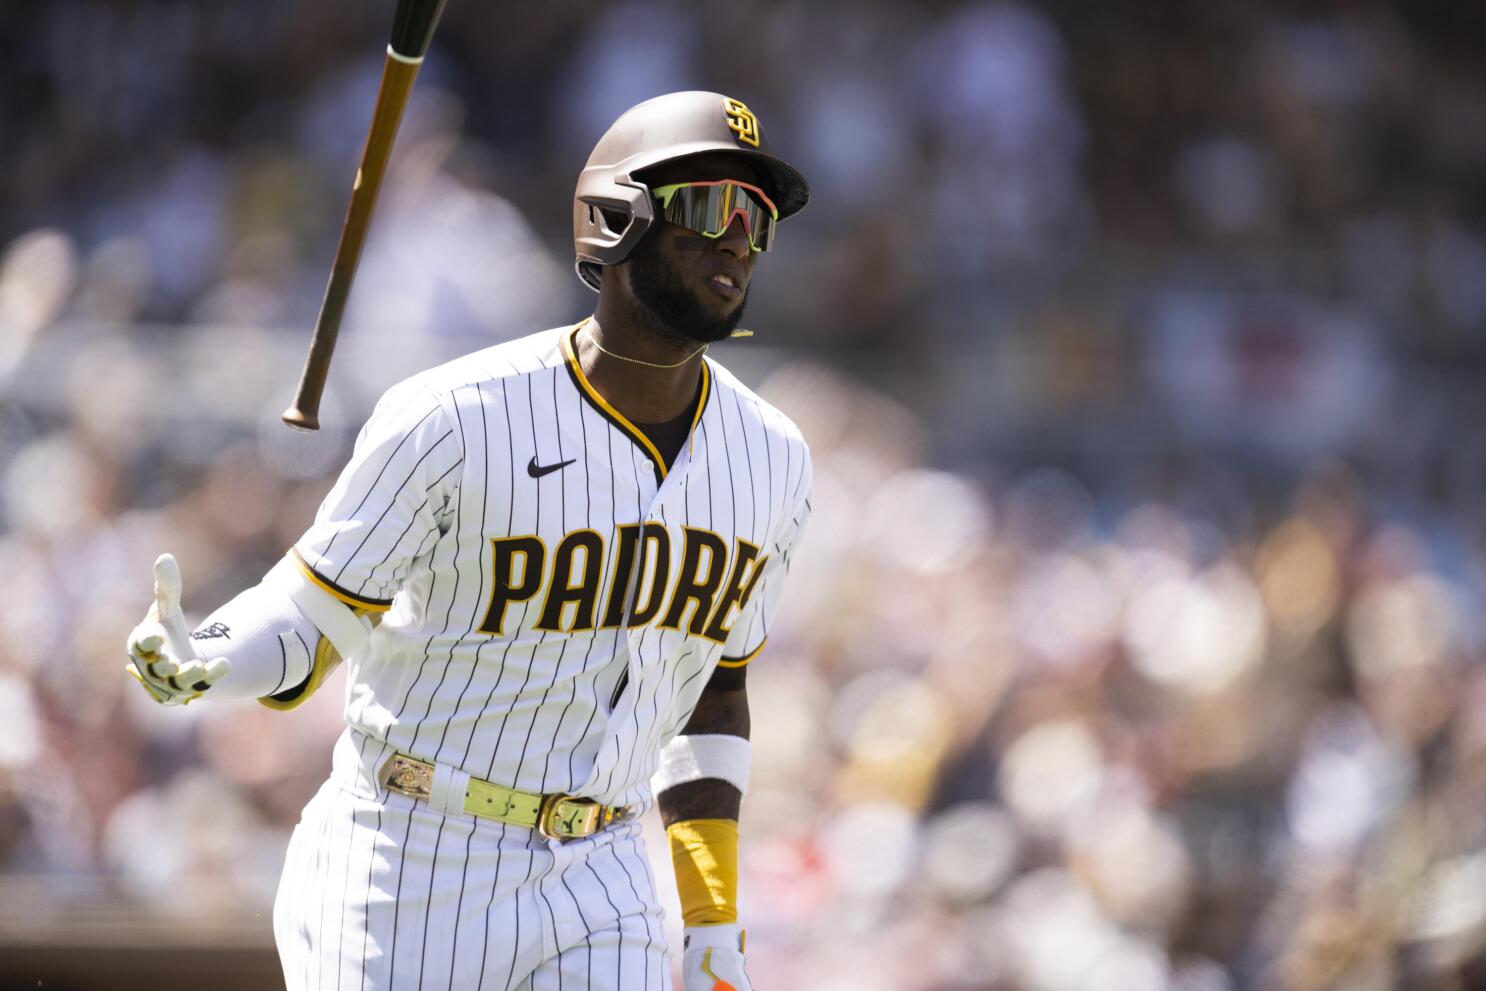 Padres anticipating strong 2022 second half